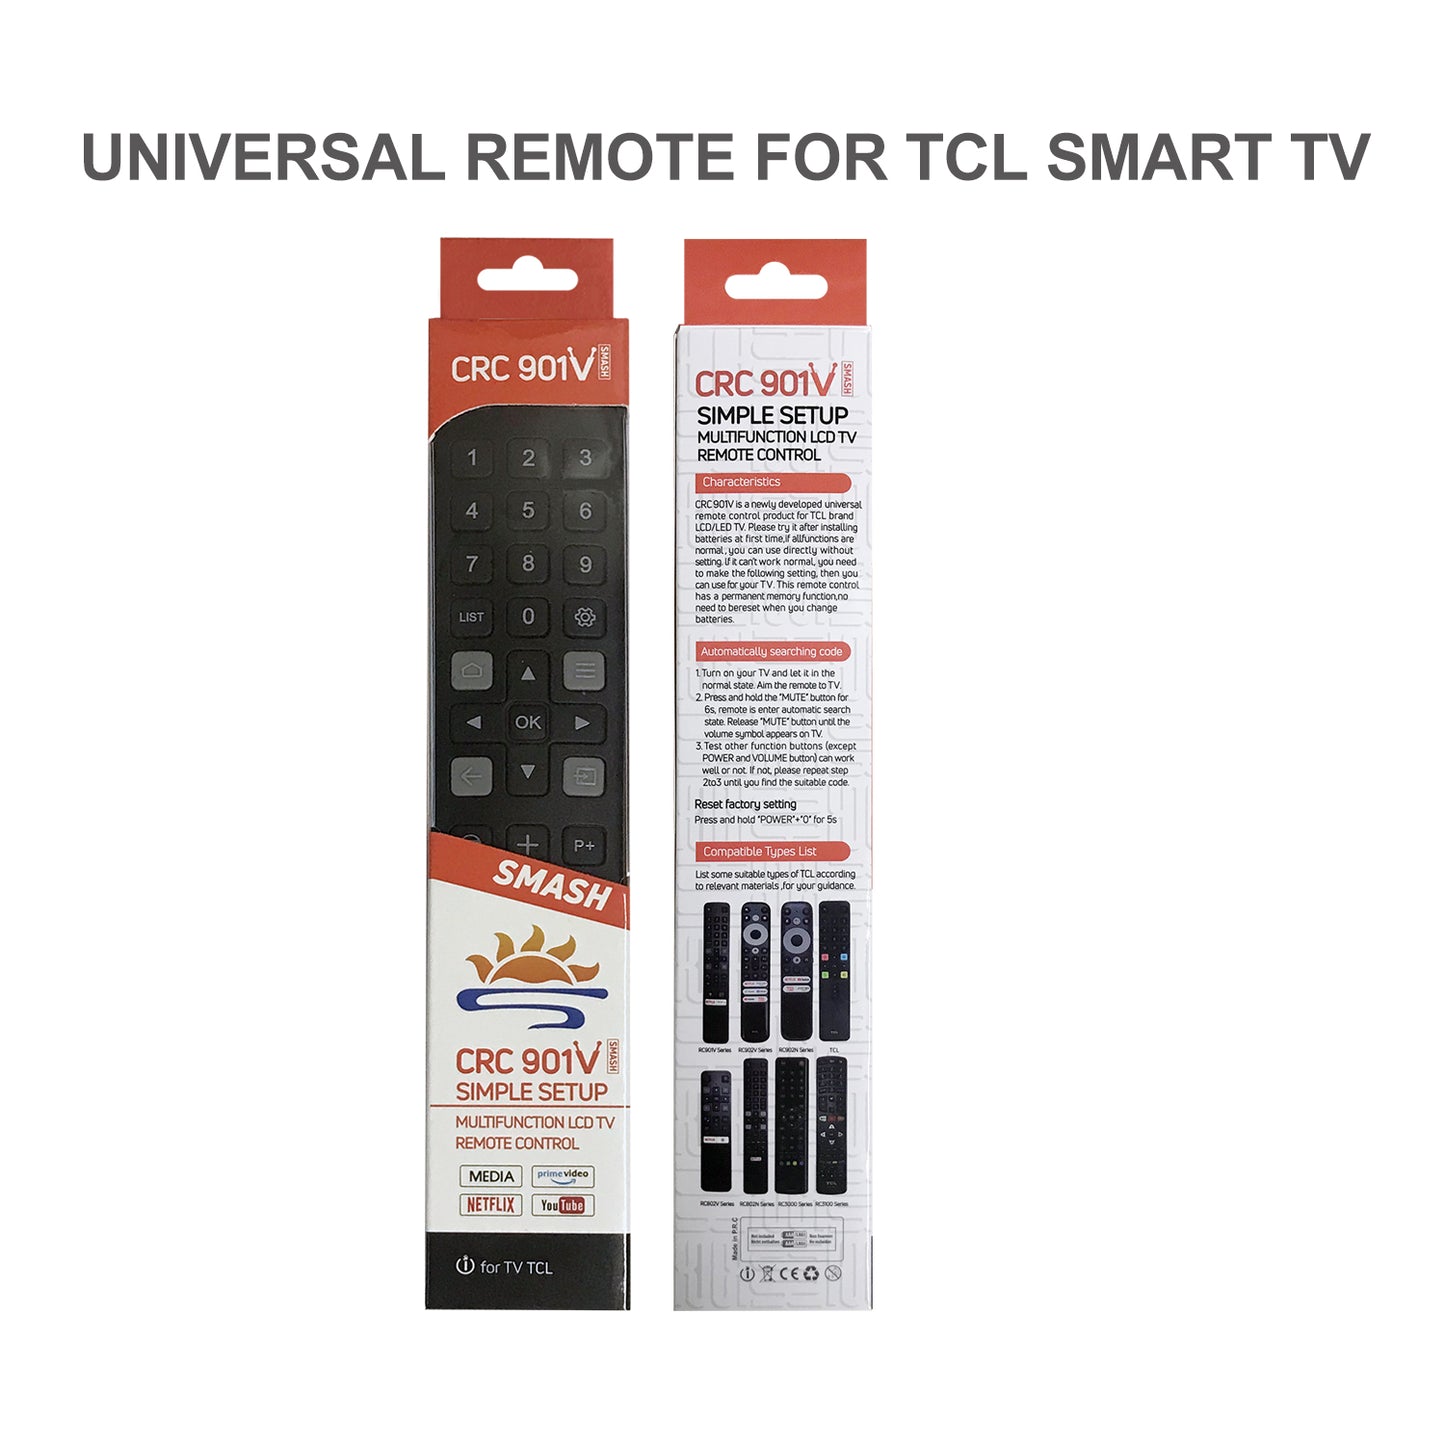 CRC901V Universal Remote Control For TCL TV, RC/RM/TA/LE/CT Series, RC2000 RC3000 RC3100 and More